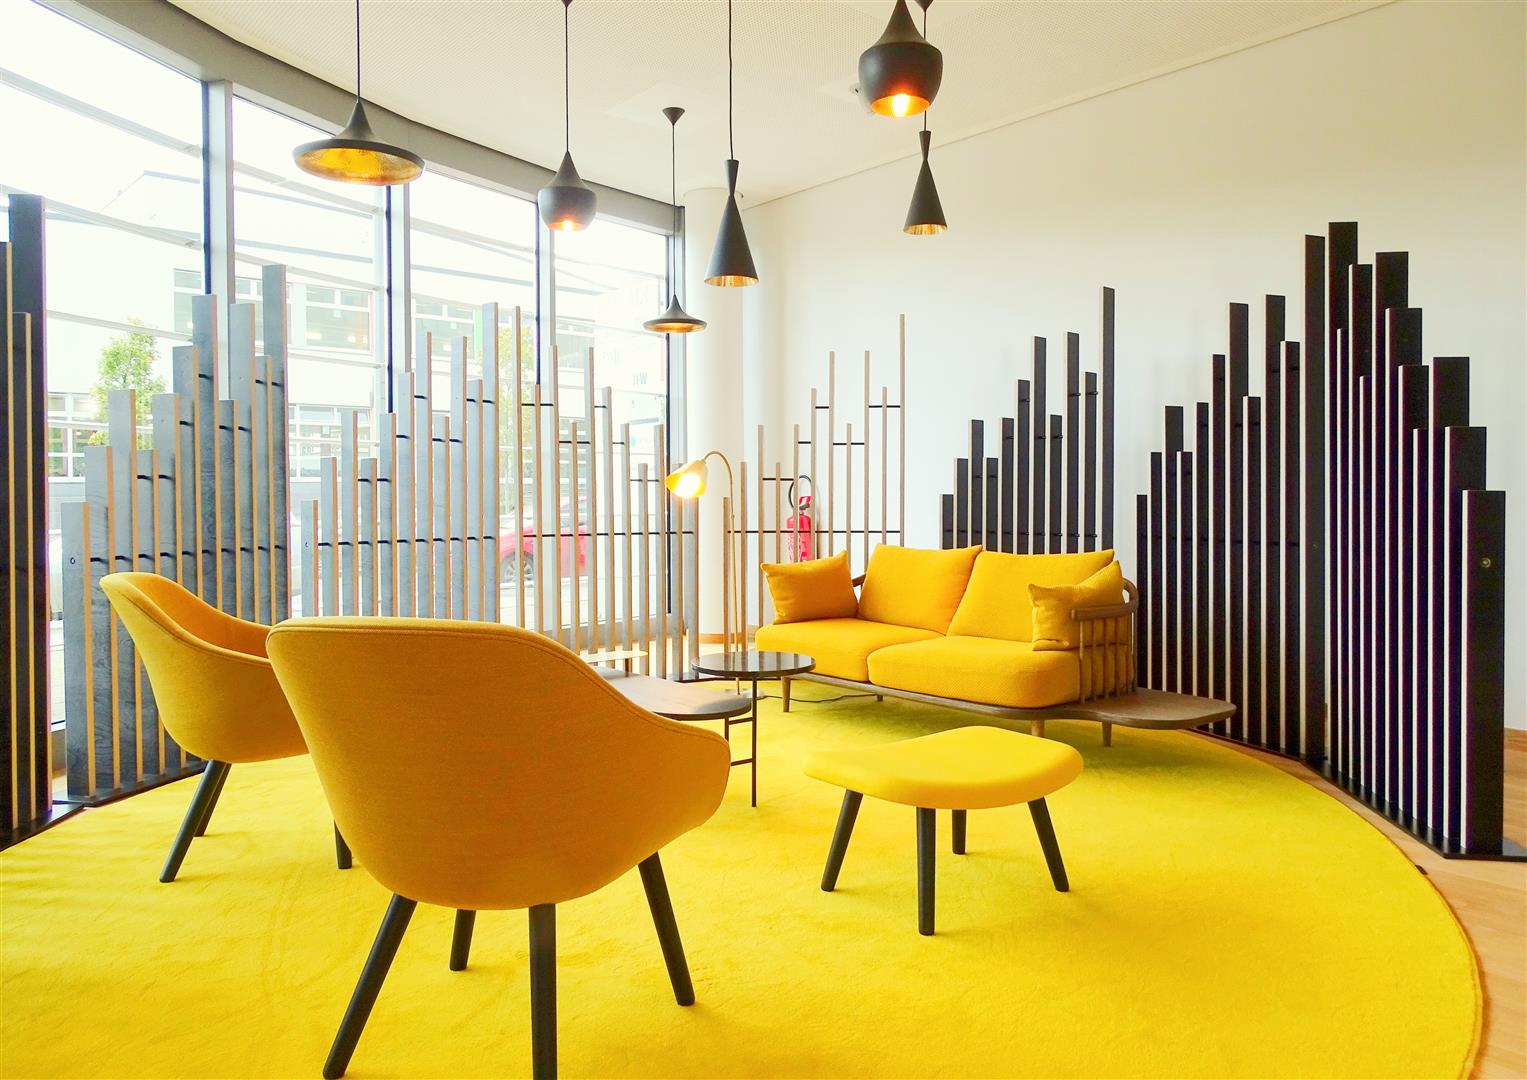 A convivial space to encourage people to meet and enjoy a coffee together in the K2 building in Kirchberg, Luxembourg